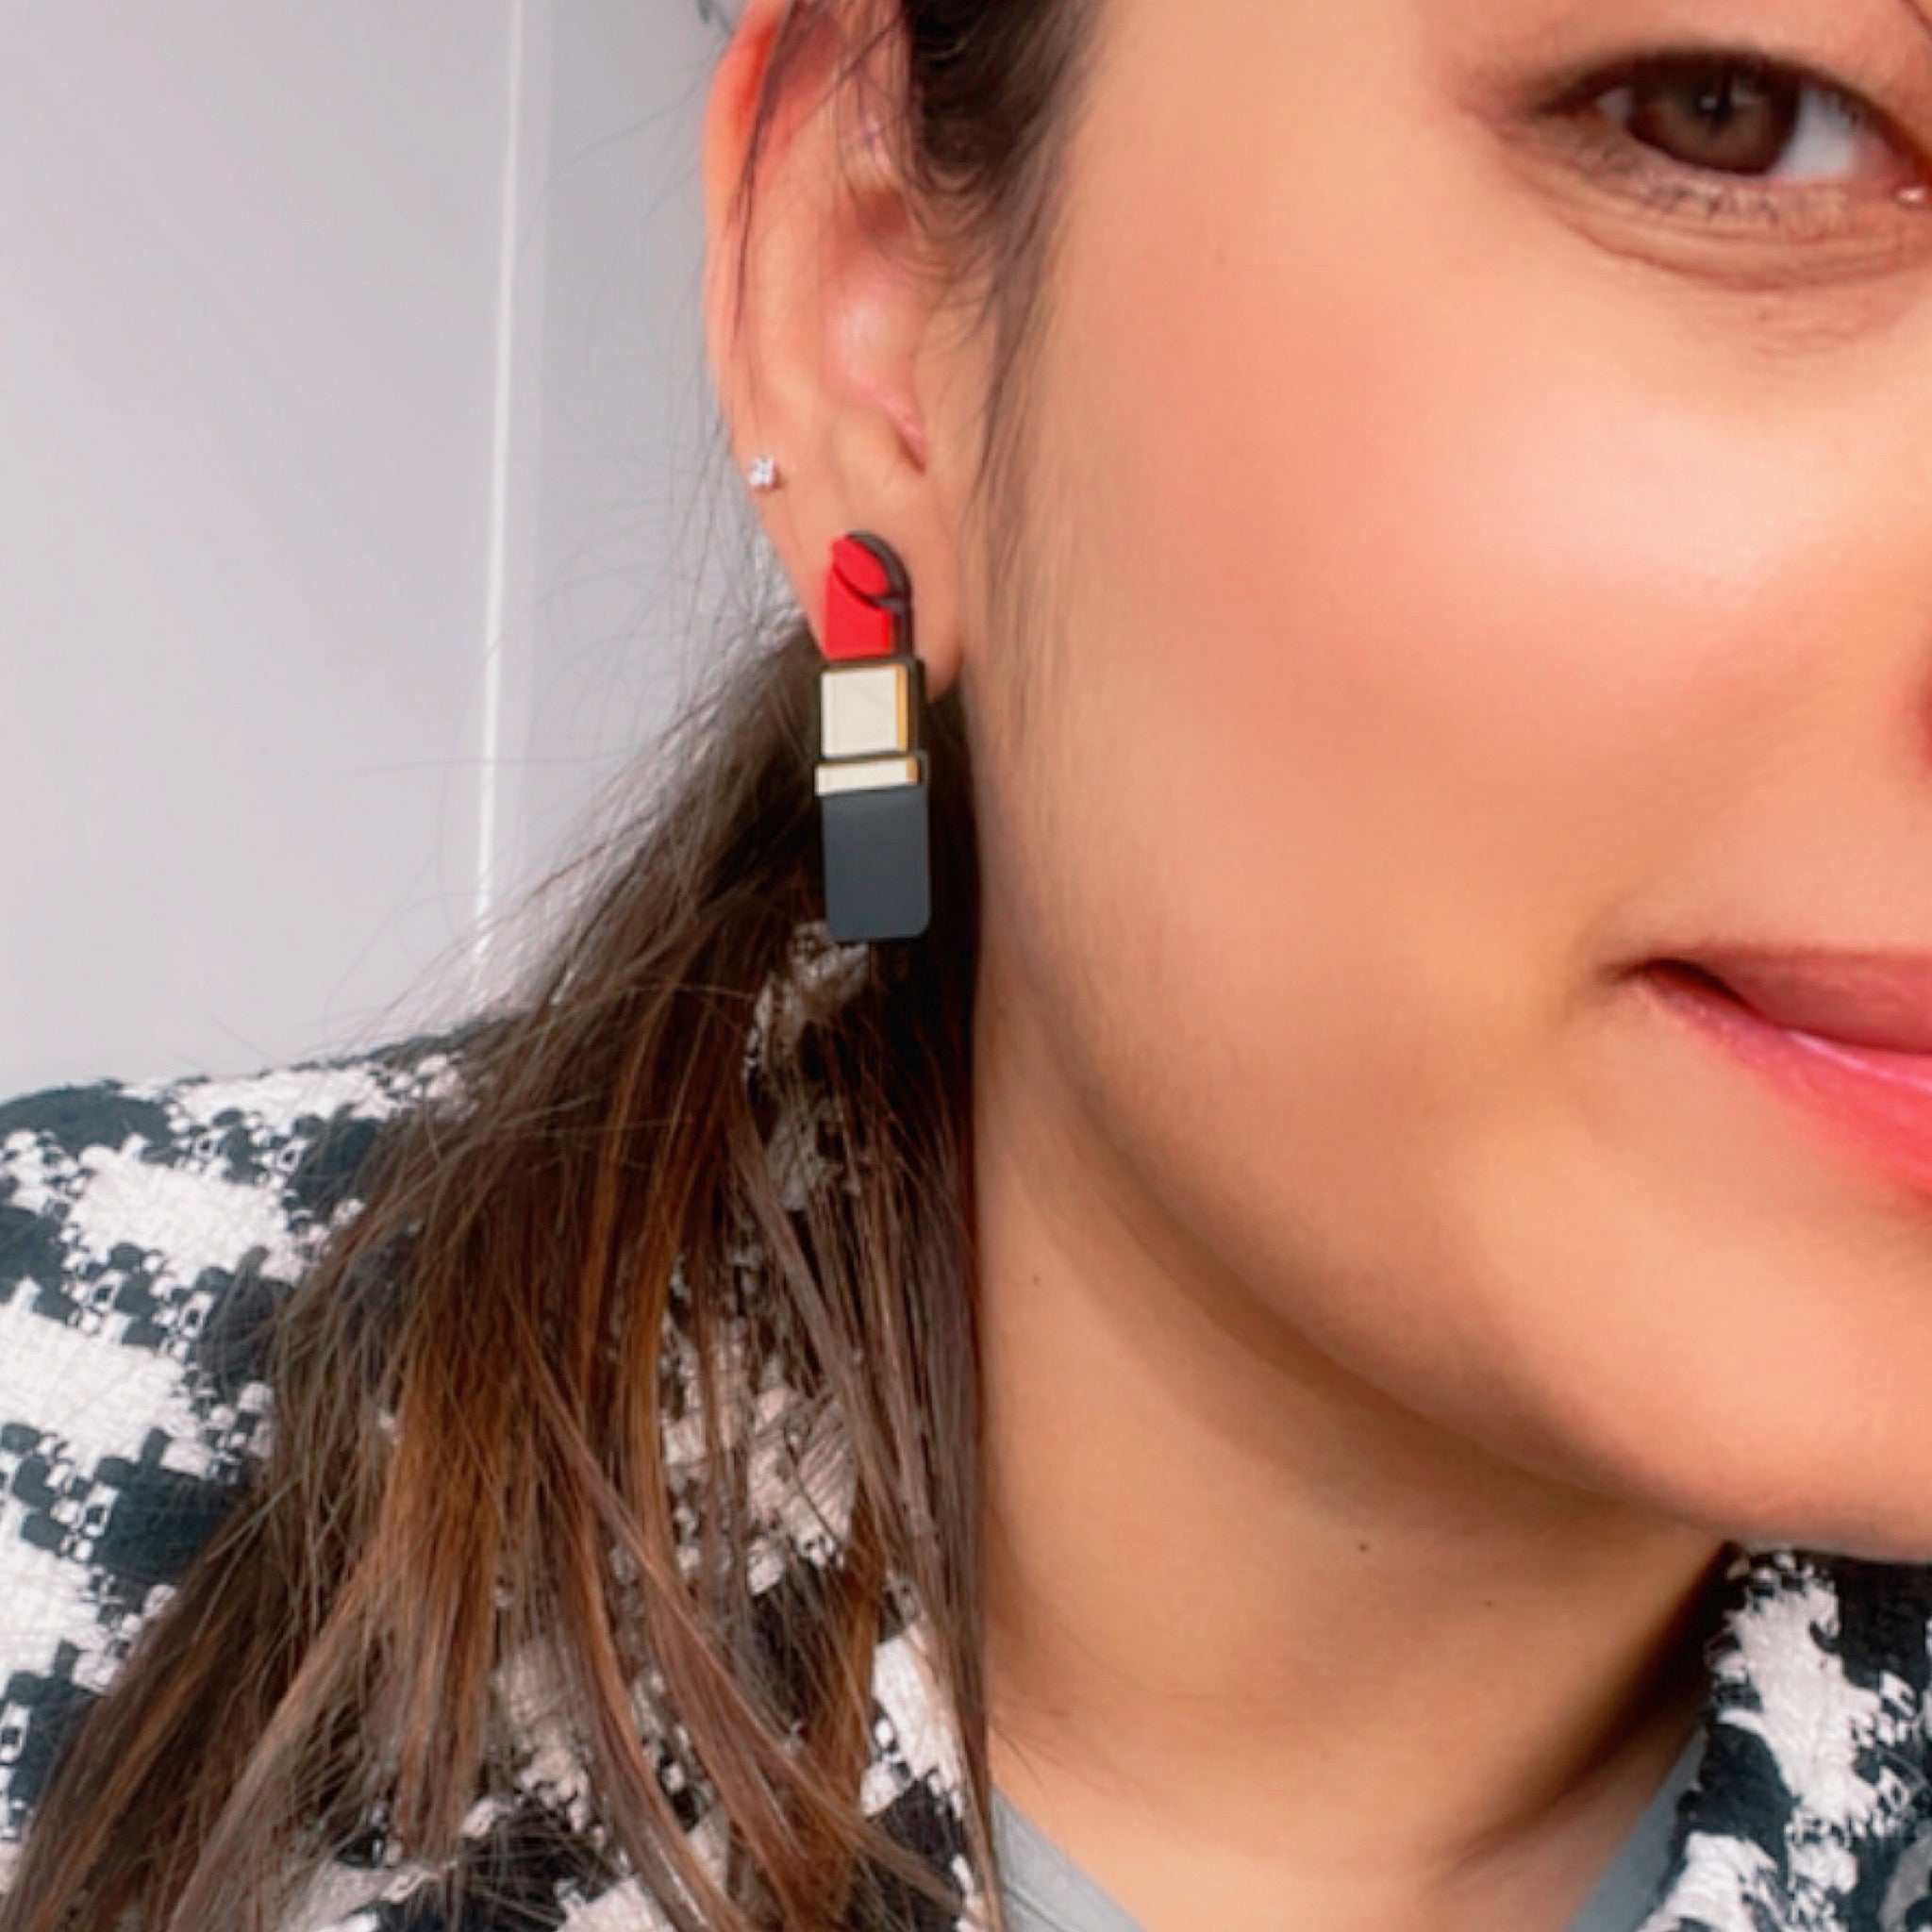 Lipstick Studs - Black and Red - Nian by Nidhi - worn by a woman